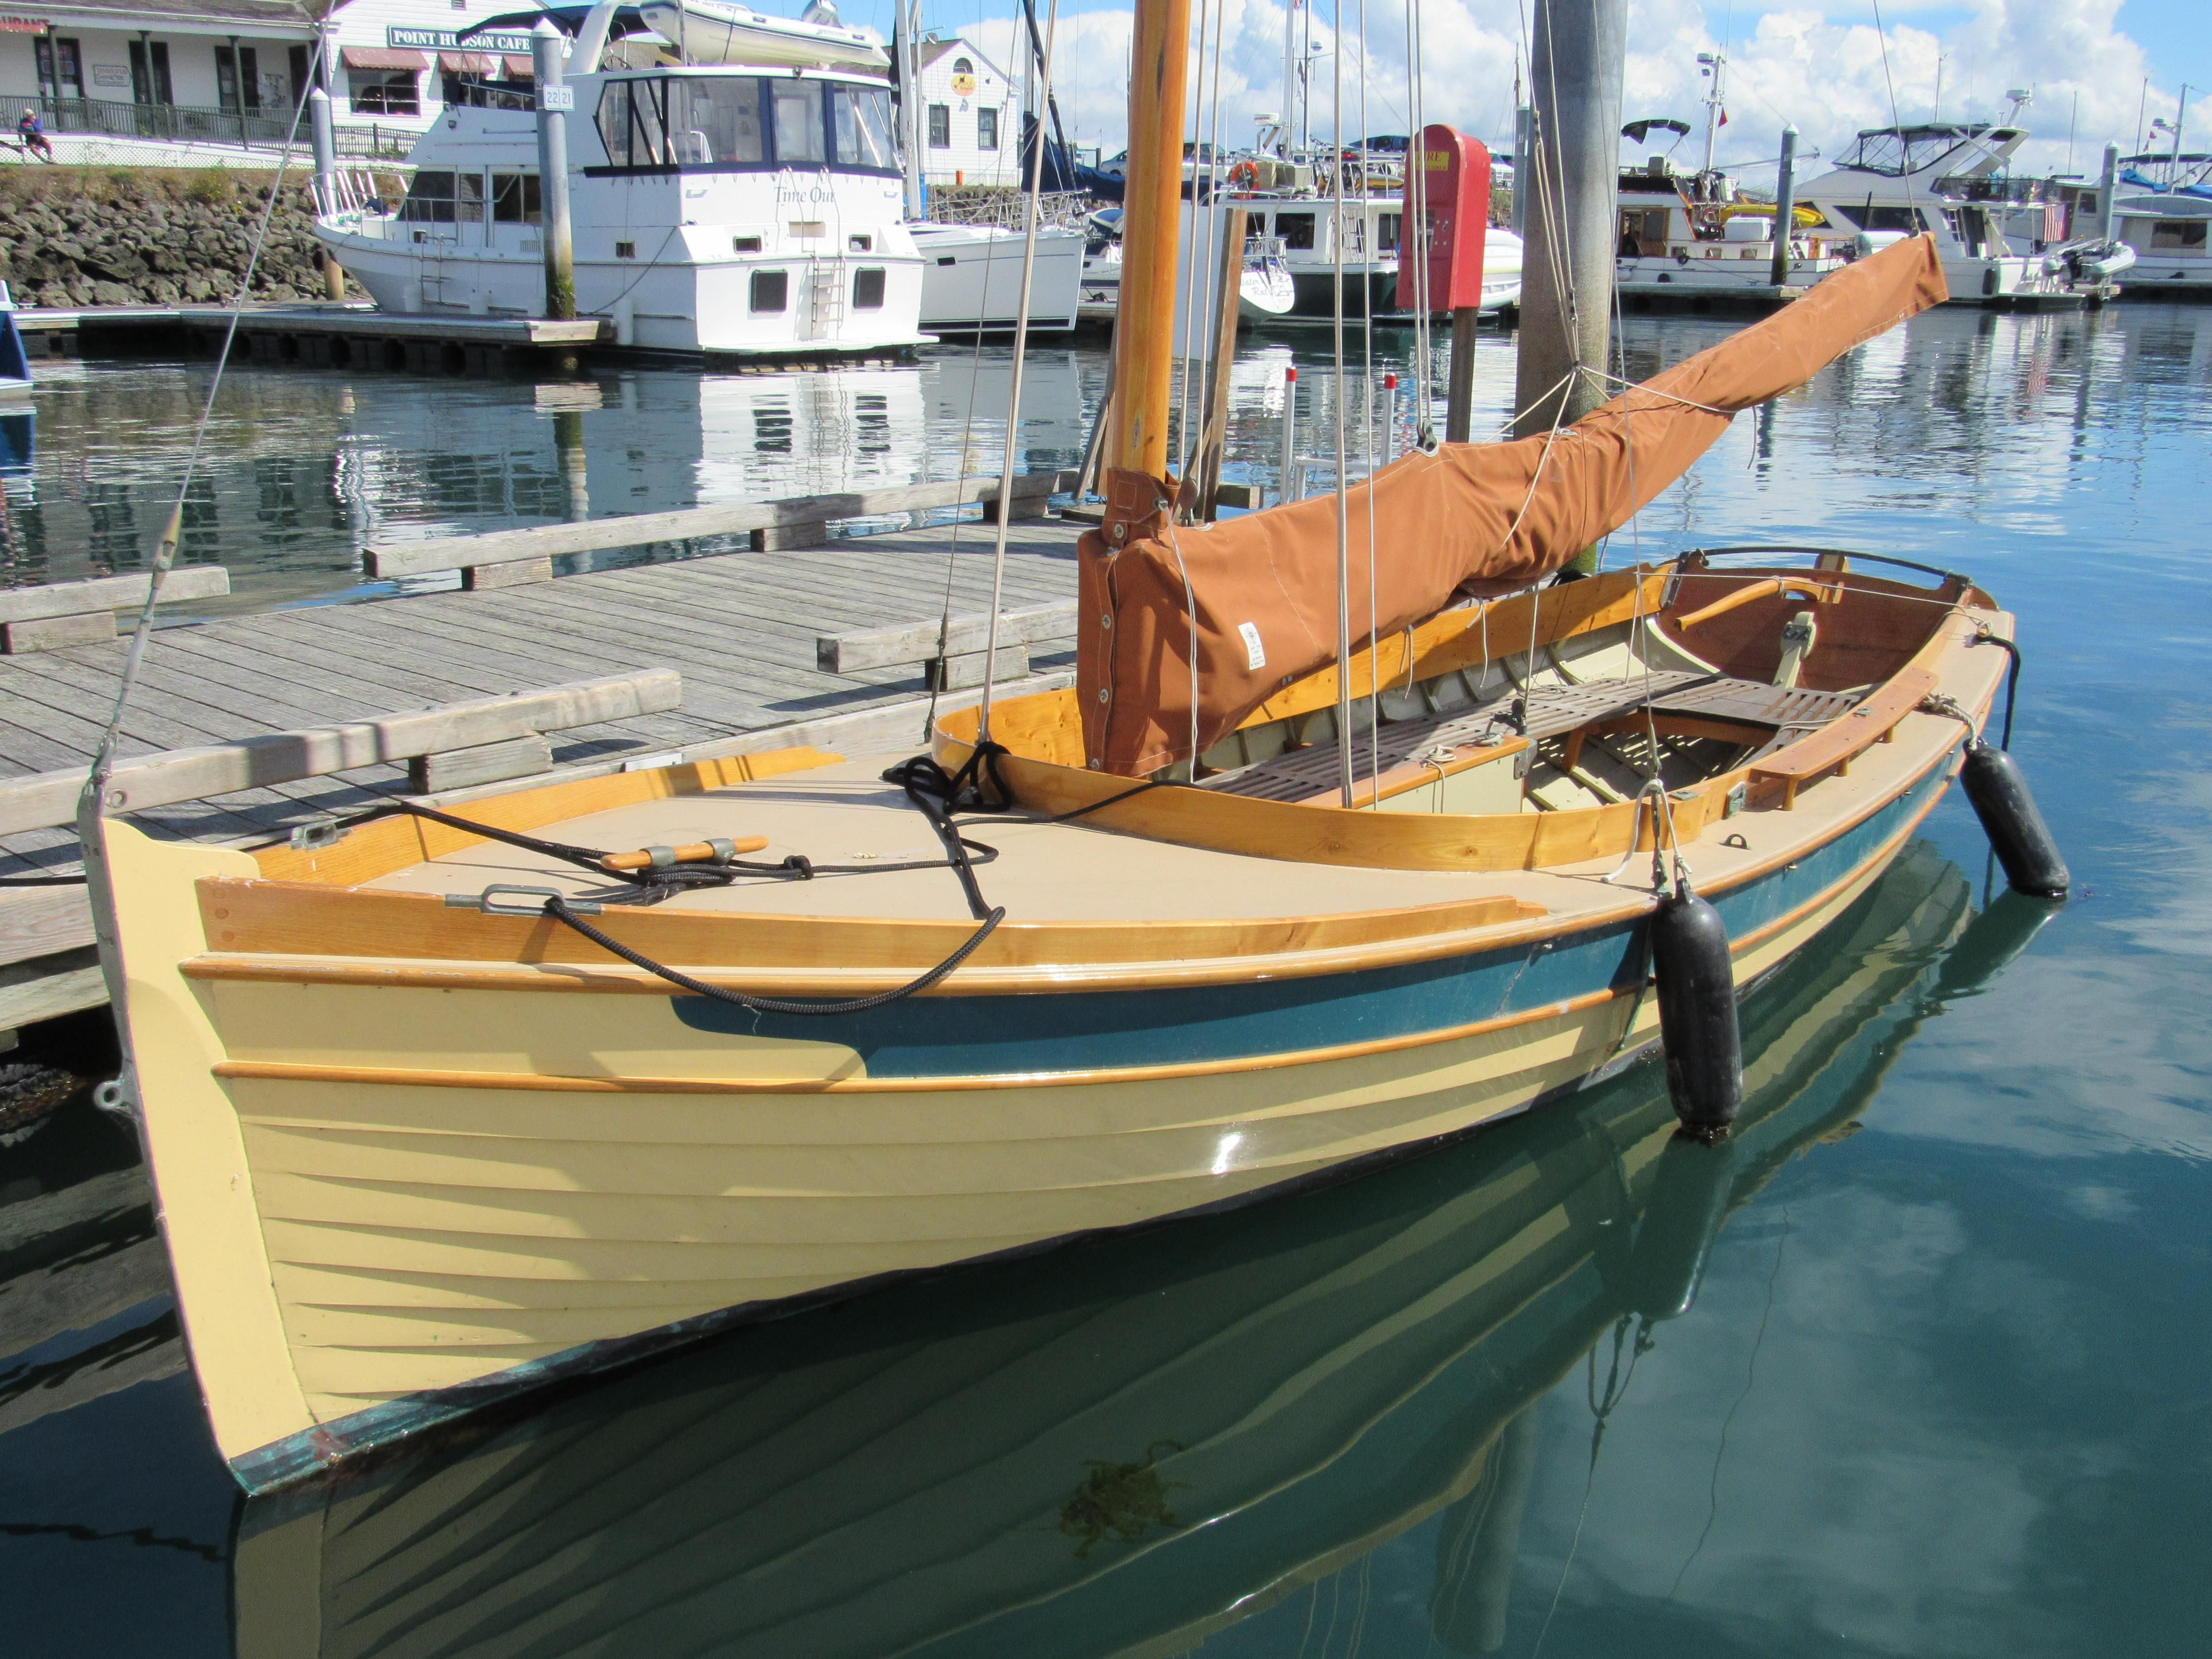 2012 Buzzards Bay 19 Sloop for sale - YachtWorld